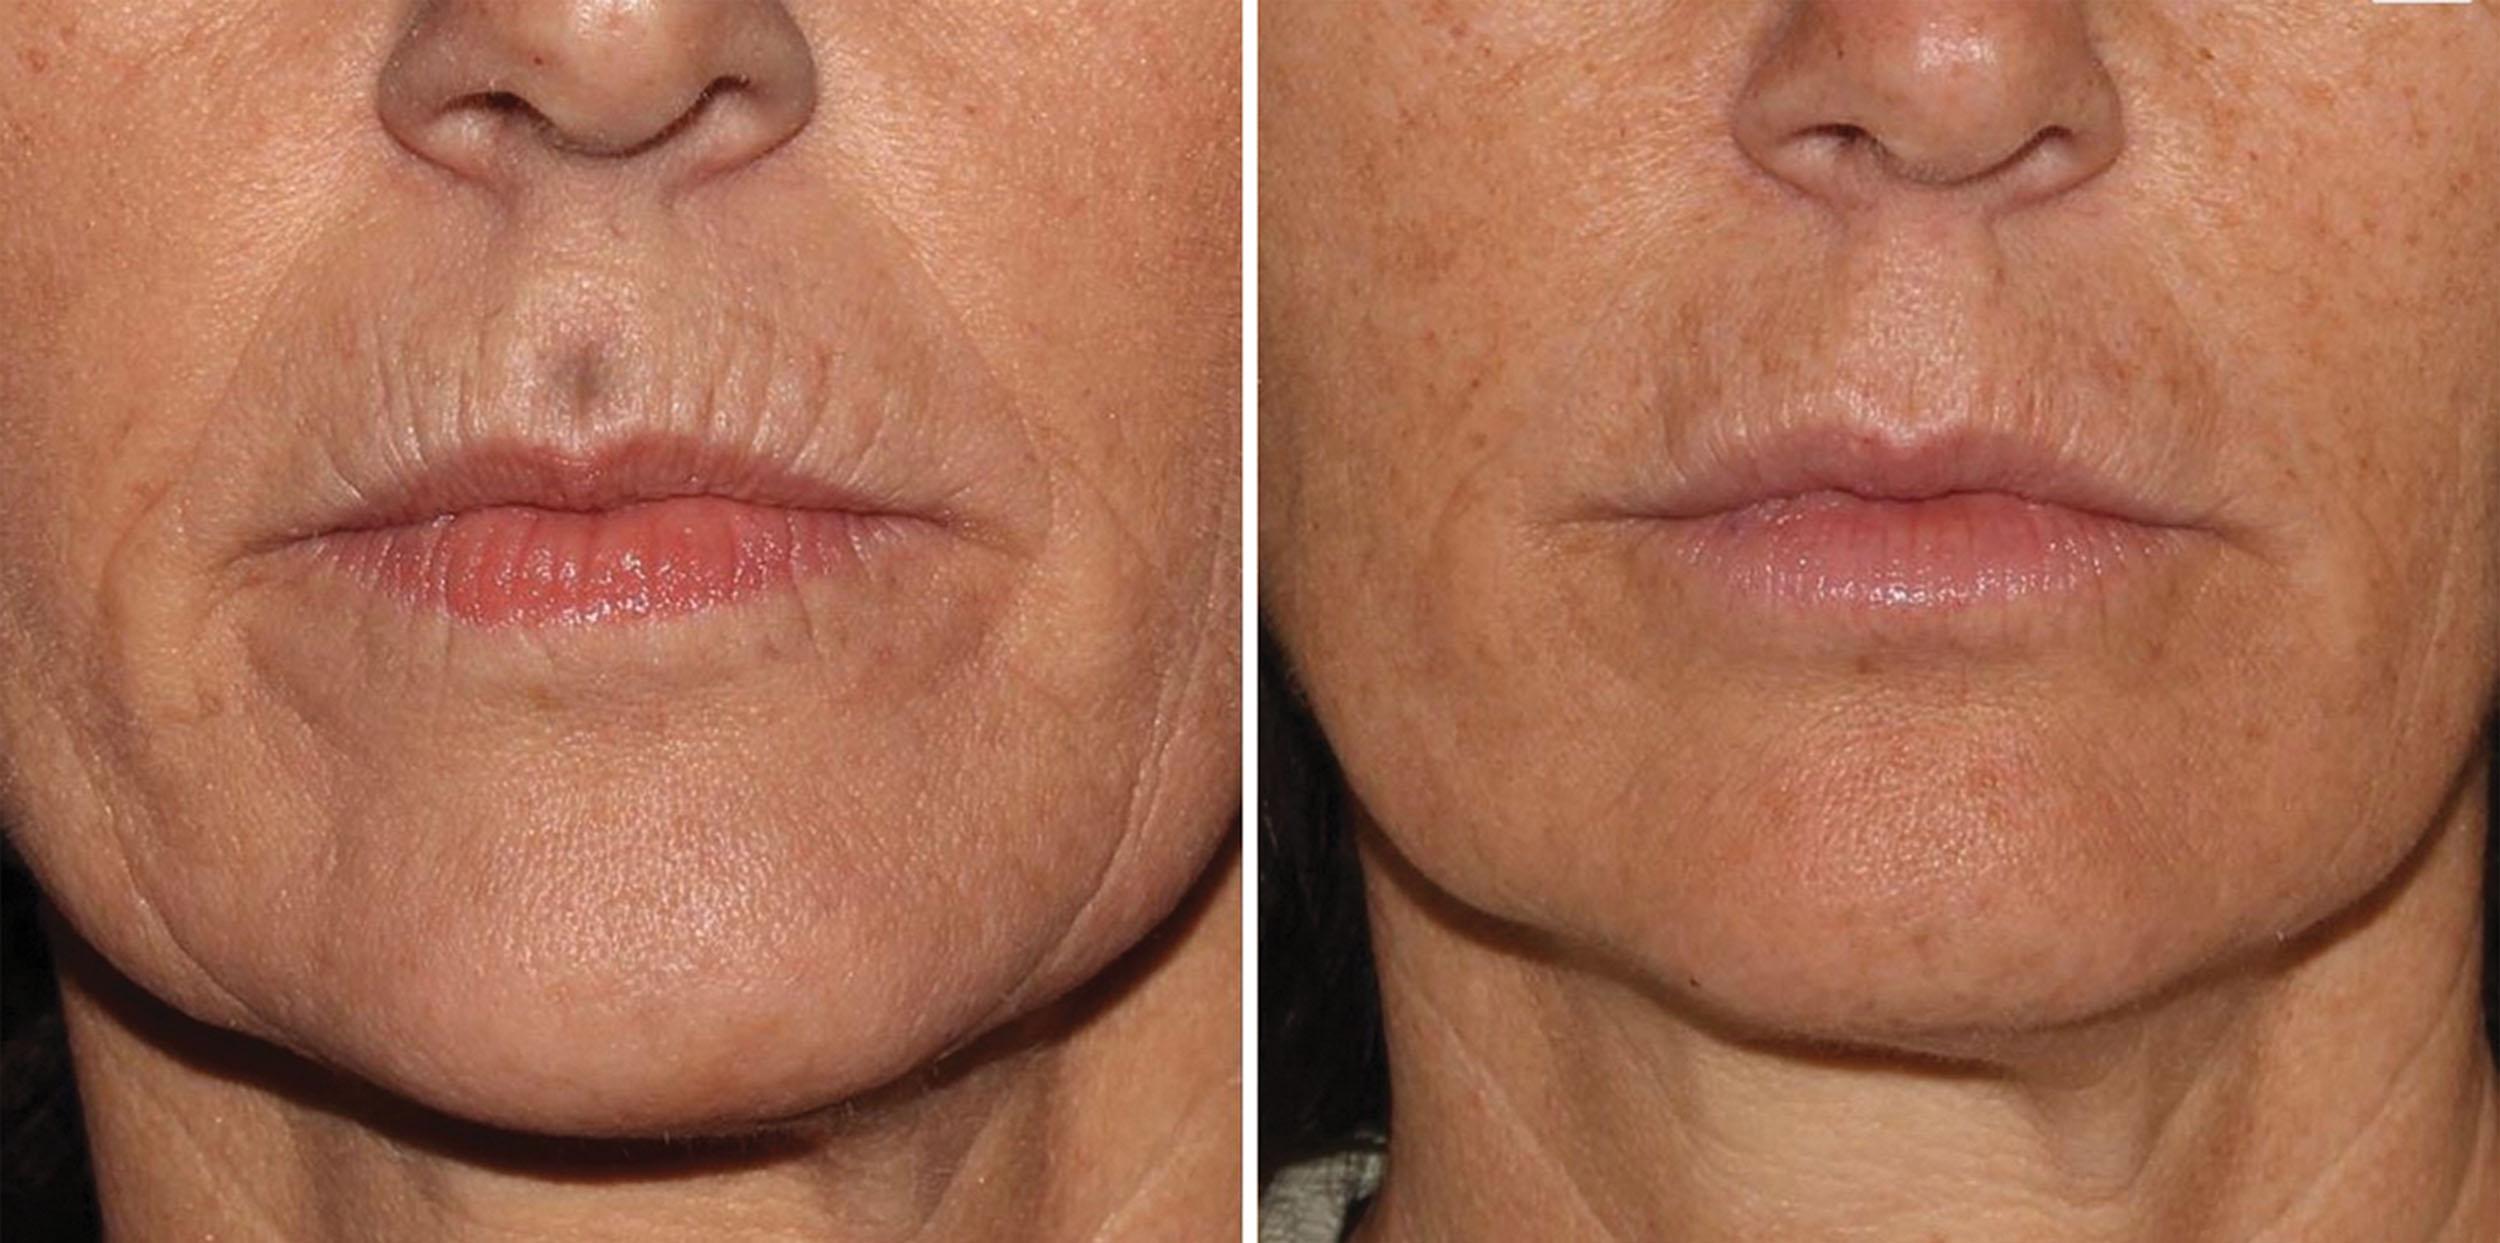 Fig. 10.59, This 54-year-old patient desired improvement of her smoker lines without enlarging her lips or looking unnatural. The patient received an injection of 0.7 mL of hyaluronic filler at the vermilion borders, which reduced the vertical smoker lines by 80%. An additional 0.5 mL was targeted in microdroplet technique for the remaining vertical rhytids and nasolabial fold. A single 1-mL syringe of hyaluronic acid filler was conservatively injected into the oral commissures. A total filler volume of 2.5 mL was used for the entire lower perioral region.